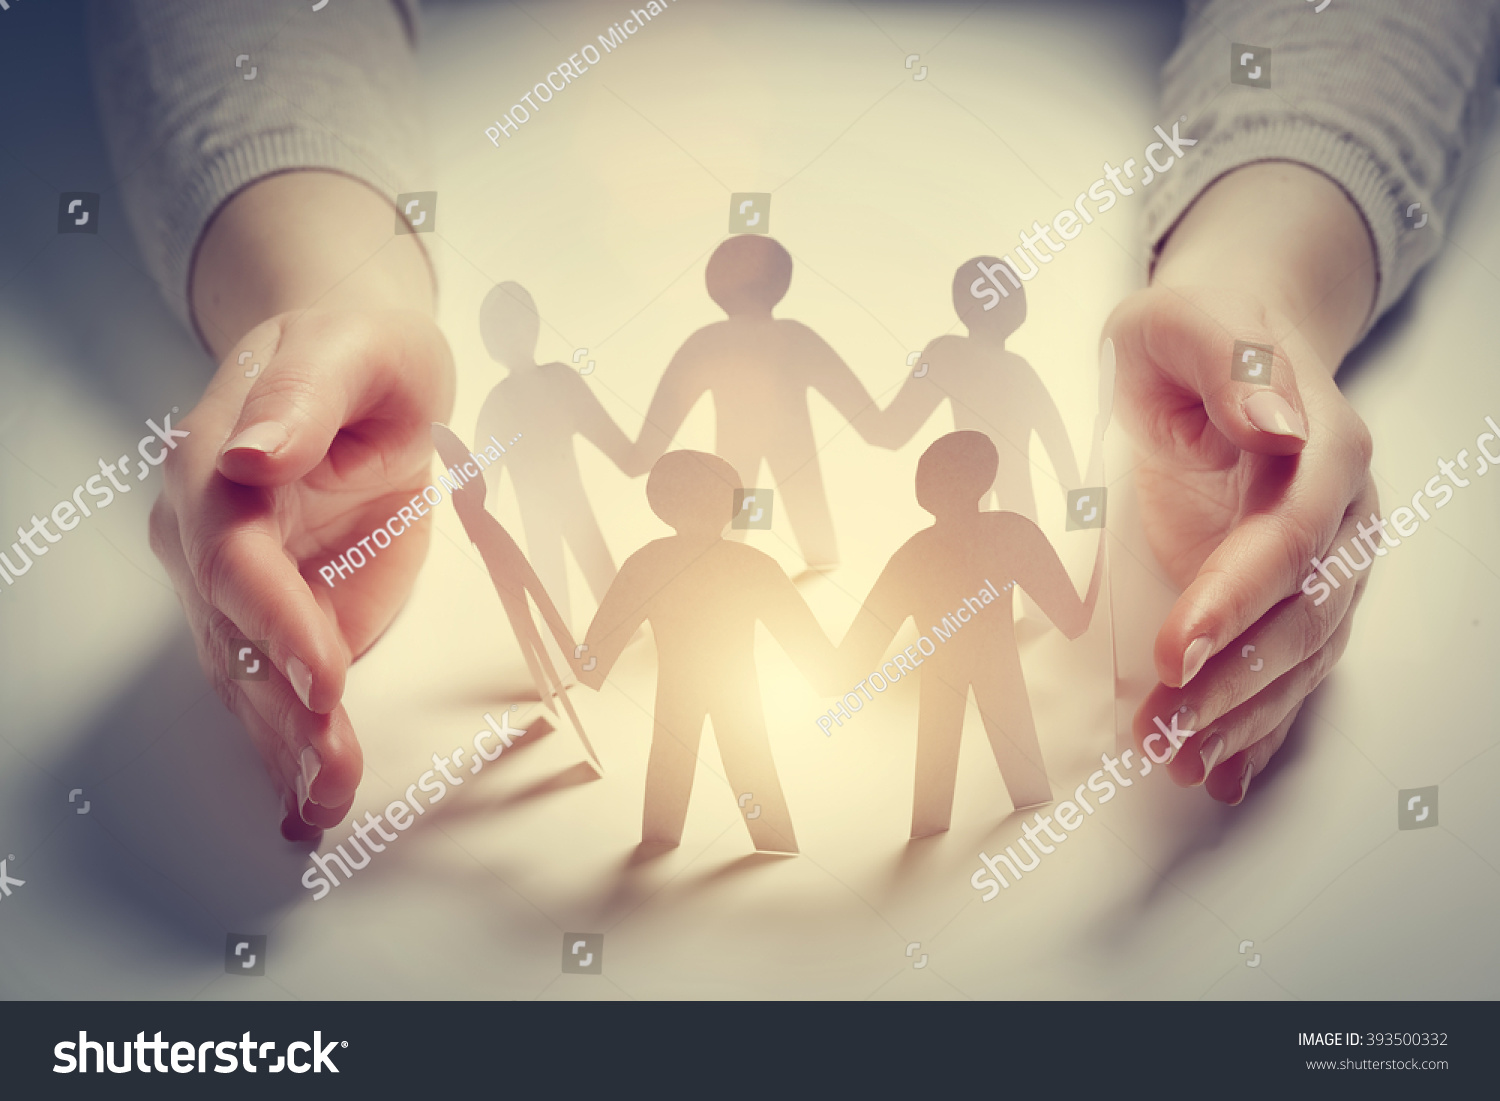 Paper people surrounded by hands in gesture of protection. Concept of insurance, social protection and support.  #393500332